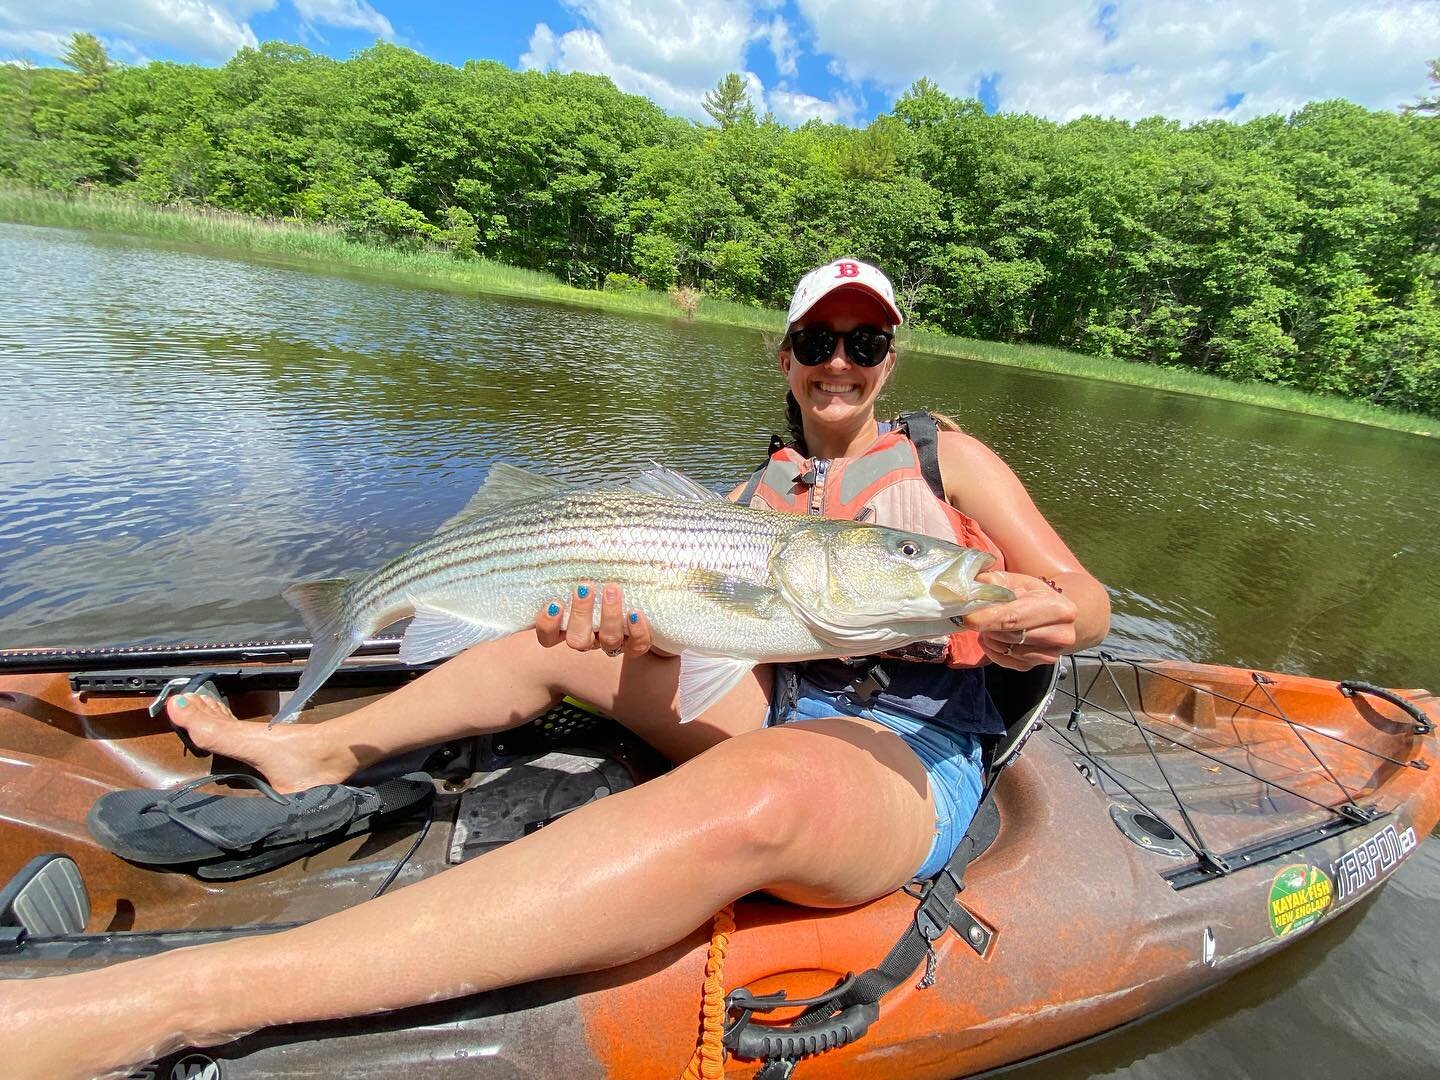 Some days the fish just won&rsquo;t cooperate&hellip;&hellip; this was not one of those days .  Slower than expected out of the gate but as we rounded the first corner it was nonstop action.  #maineguide #kayakfishnewengland #wildyfishing #torqeedofi